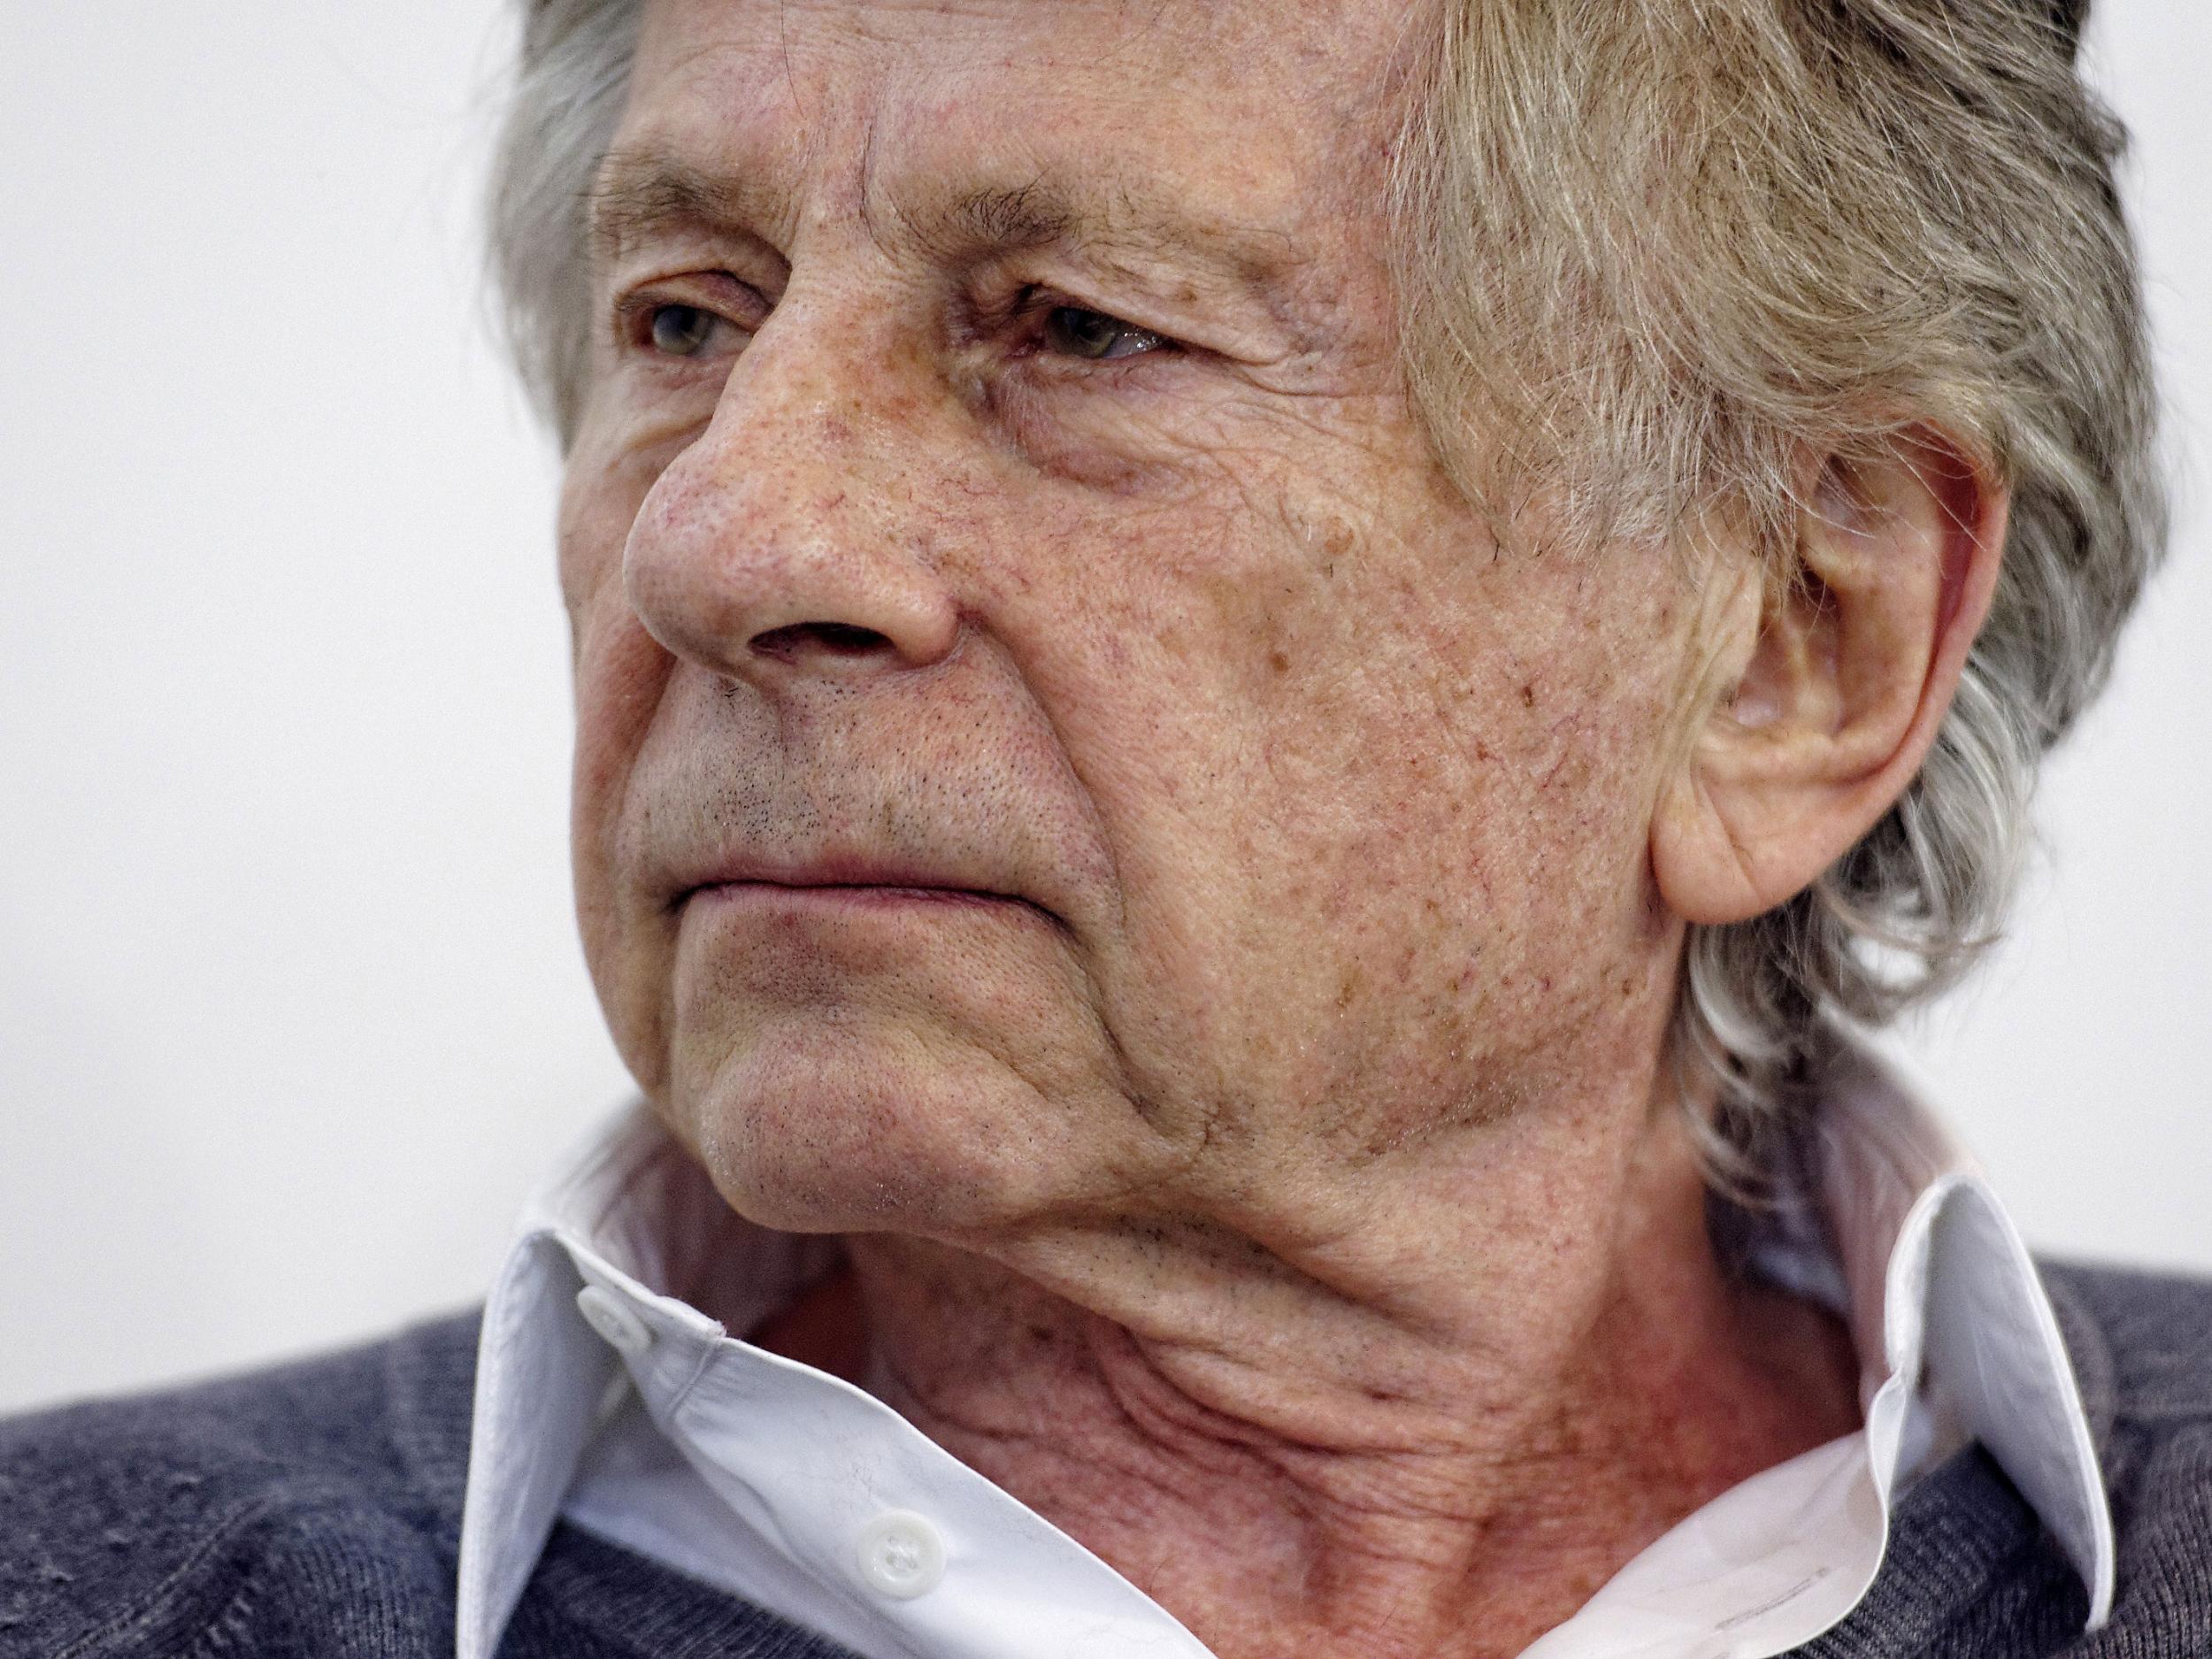 The judge’s decision could close the case in Polanski’s favour, providing the US does not appeal